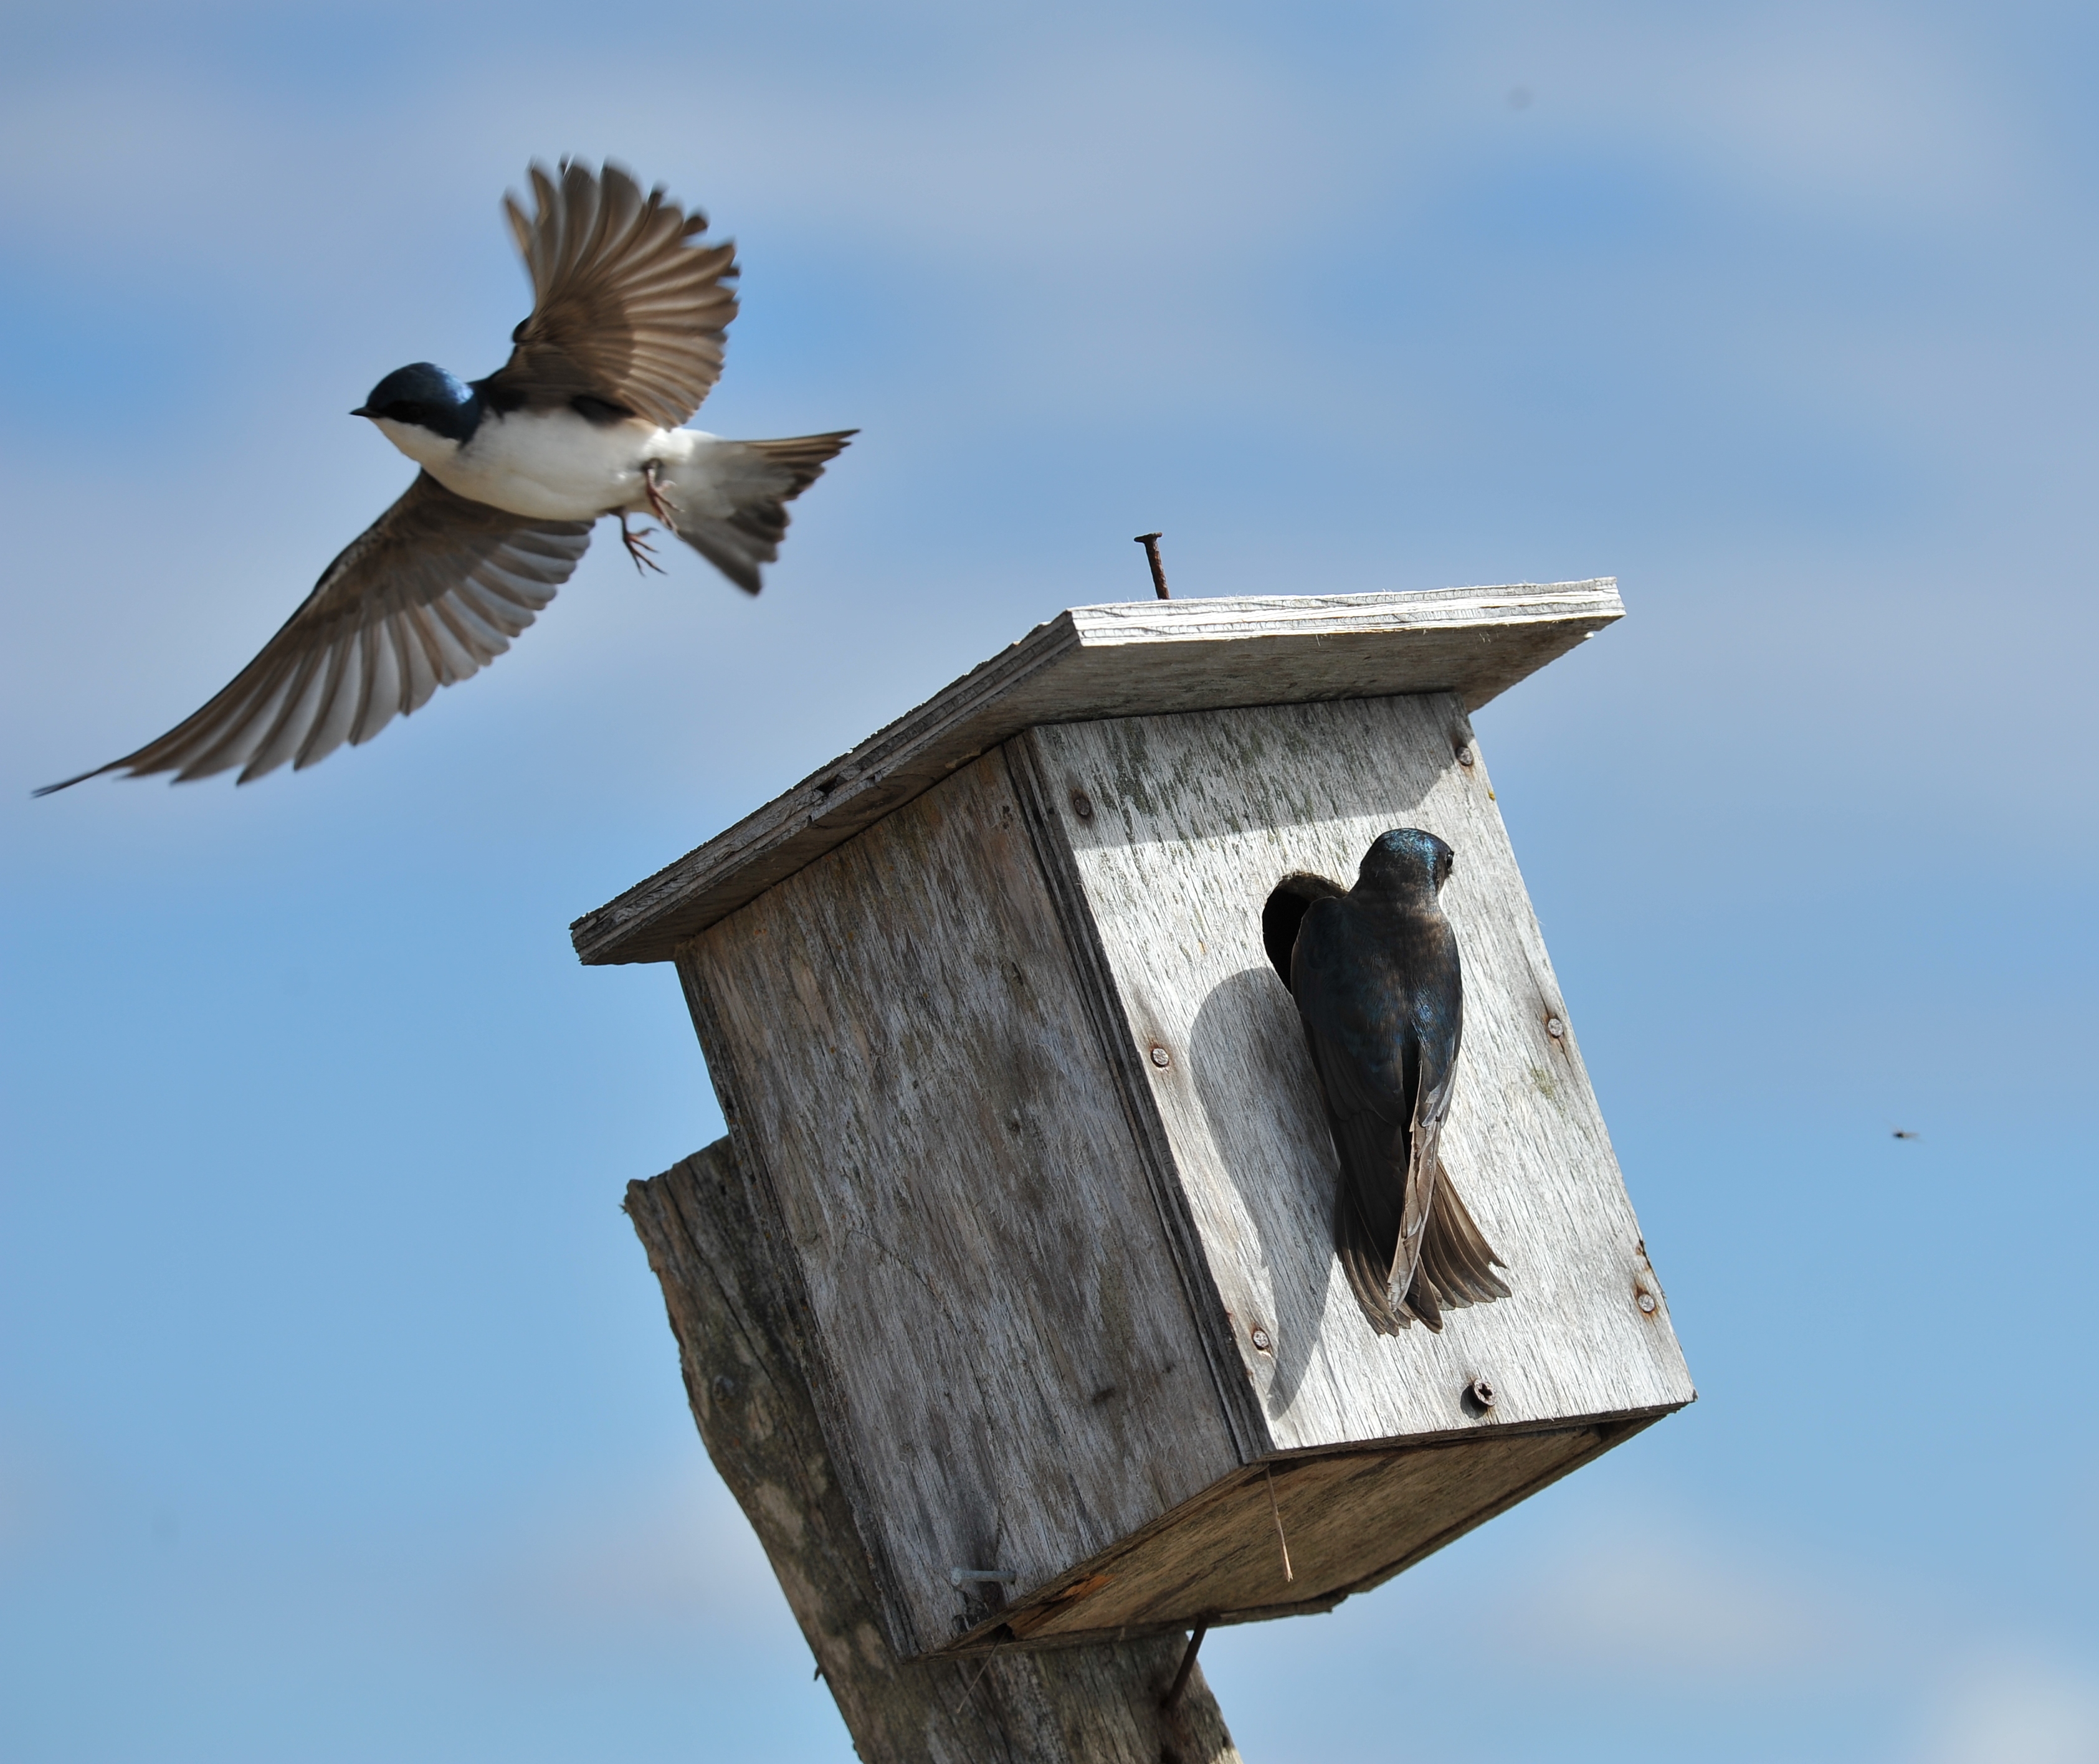 photograph of two birds. One bird flying in the sky. One bird sitting on bird house.